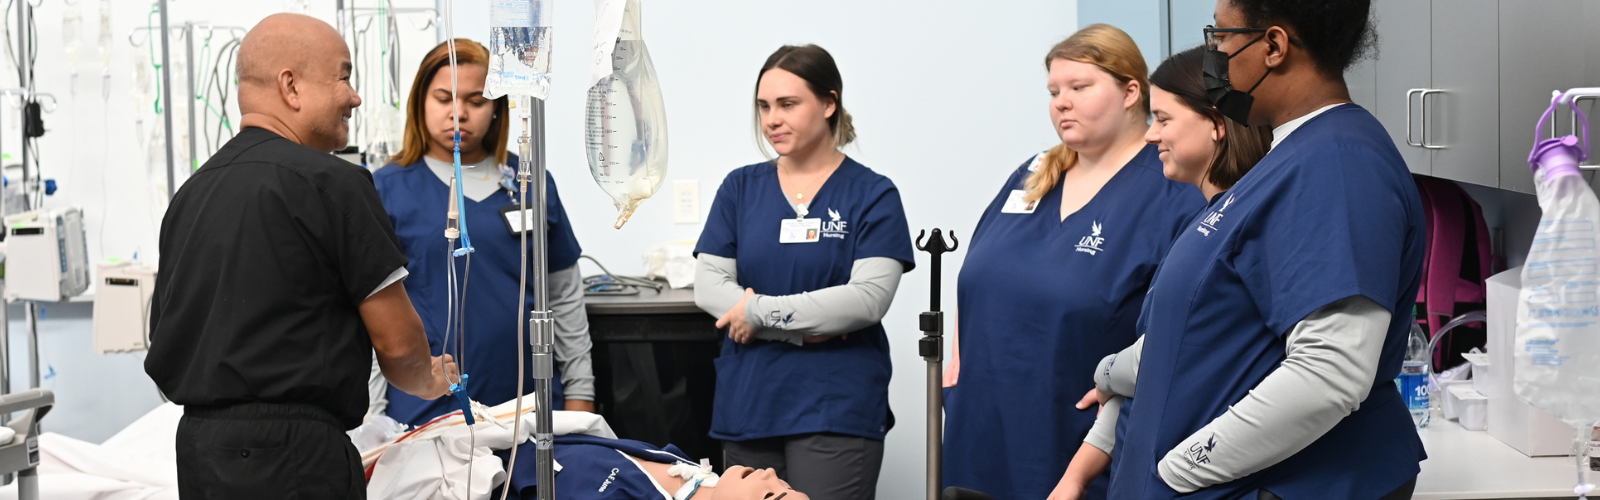 Nursing faculty member with five female nursing students learning about the cadaver